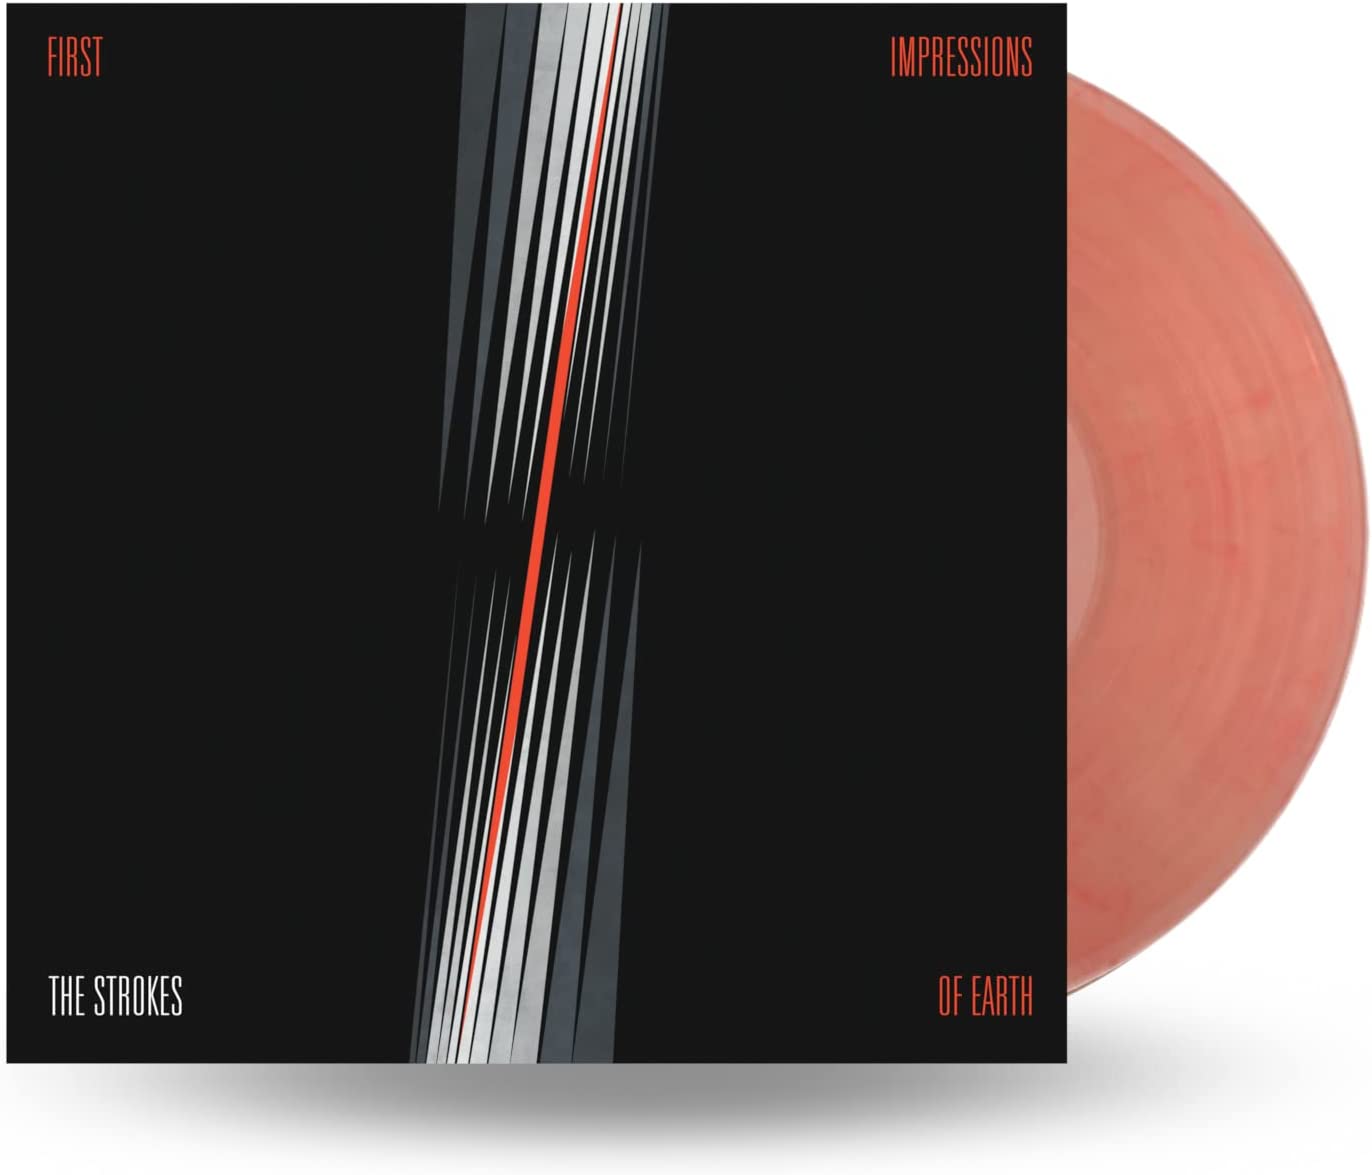 The Strokes / First Impressions of Earth coloured vinyl reissue